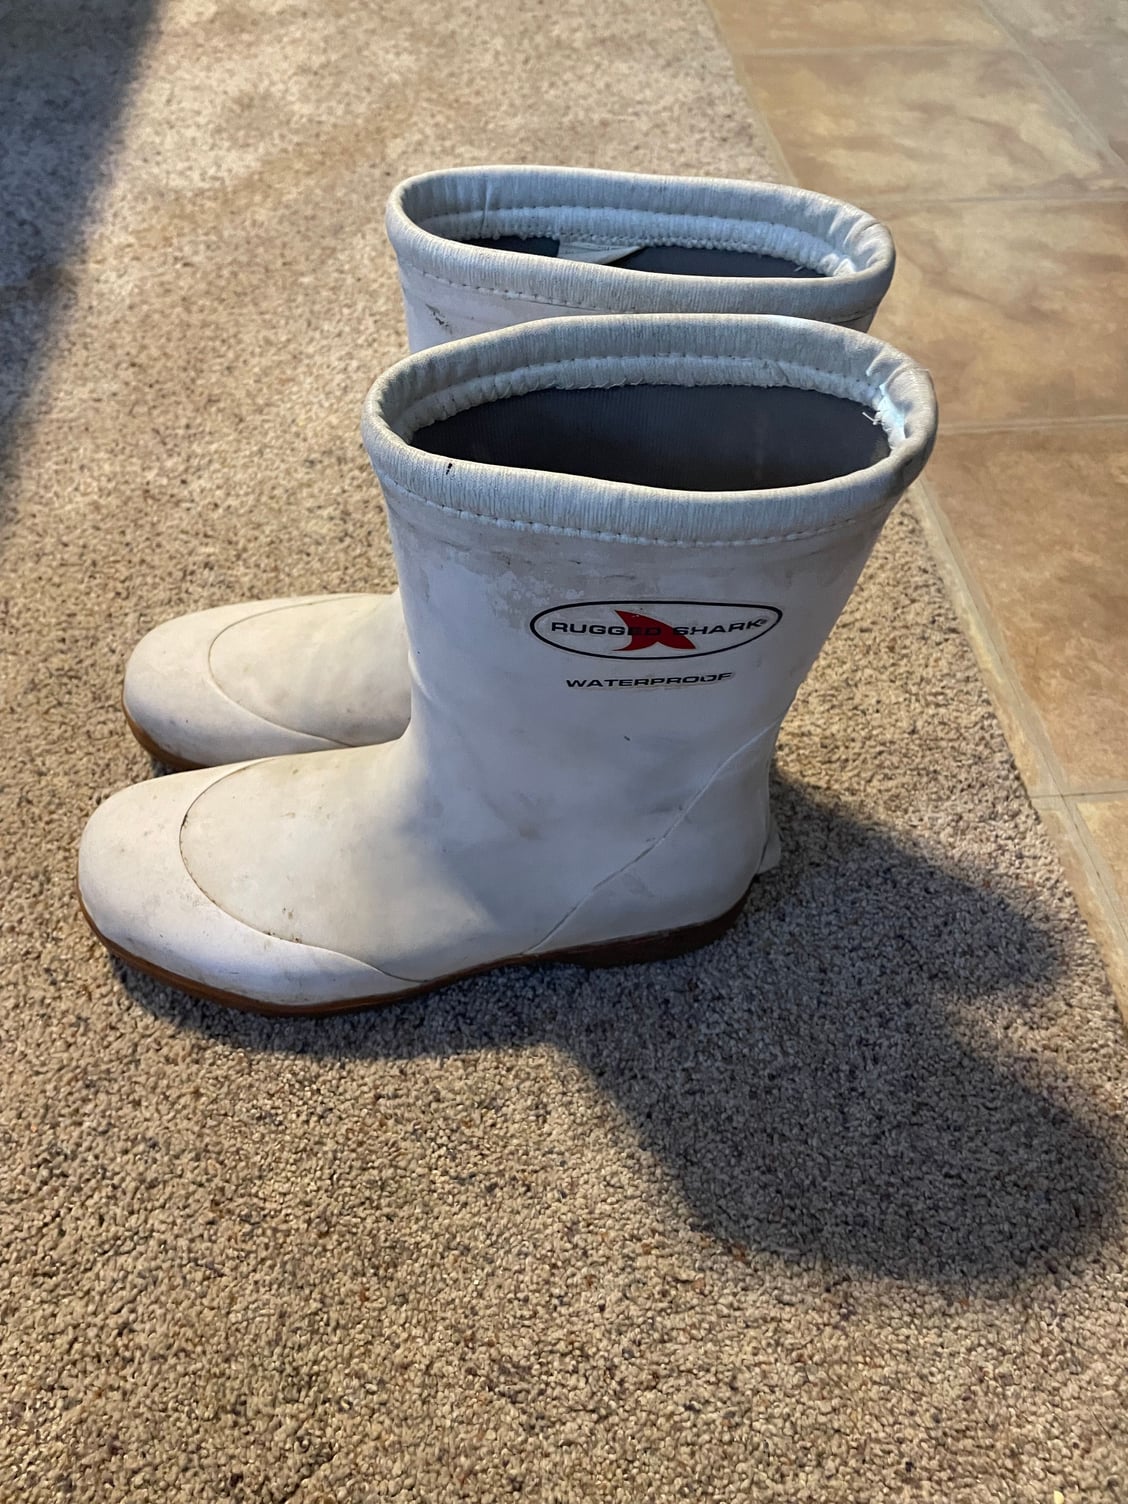 Rugged Shark fishing boots - men's size 10 - white - The Hull Truth -  Boating and Fishing Forum